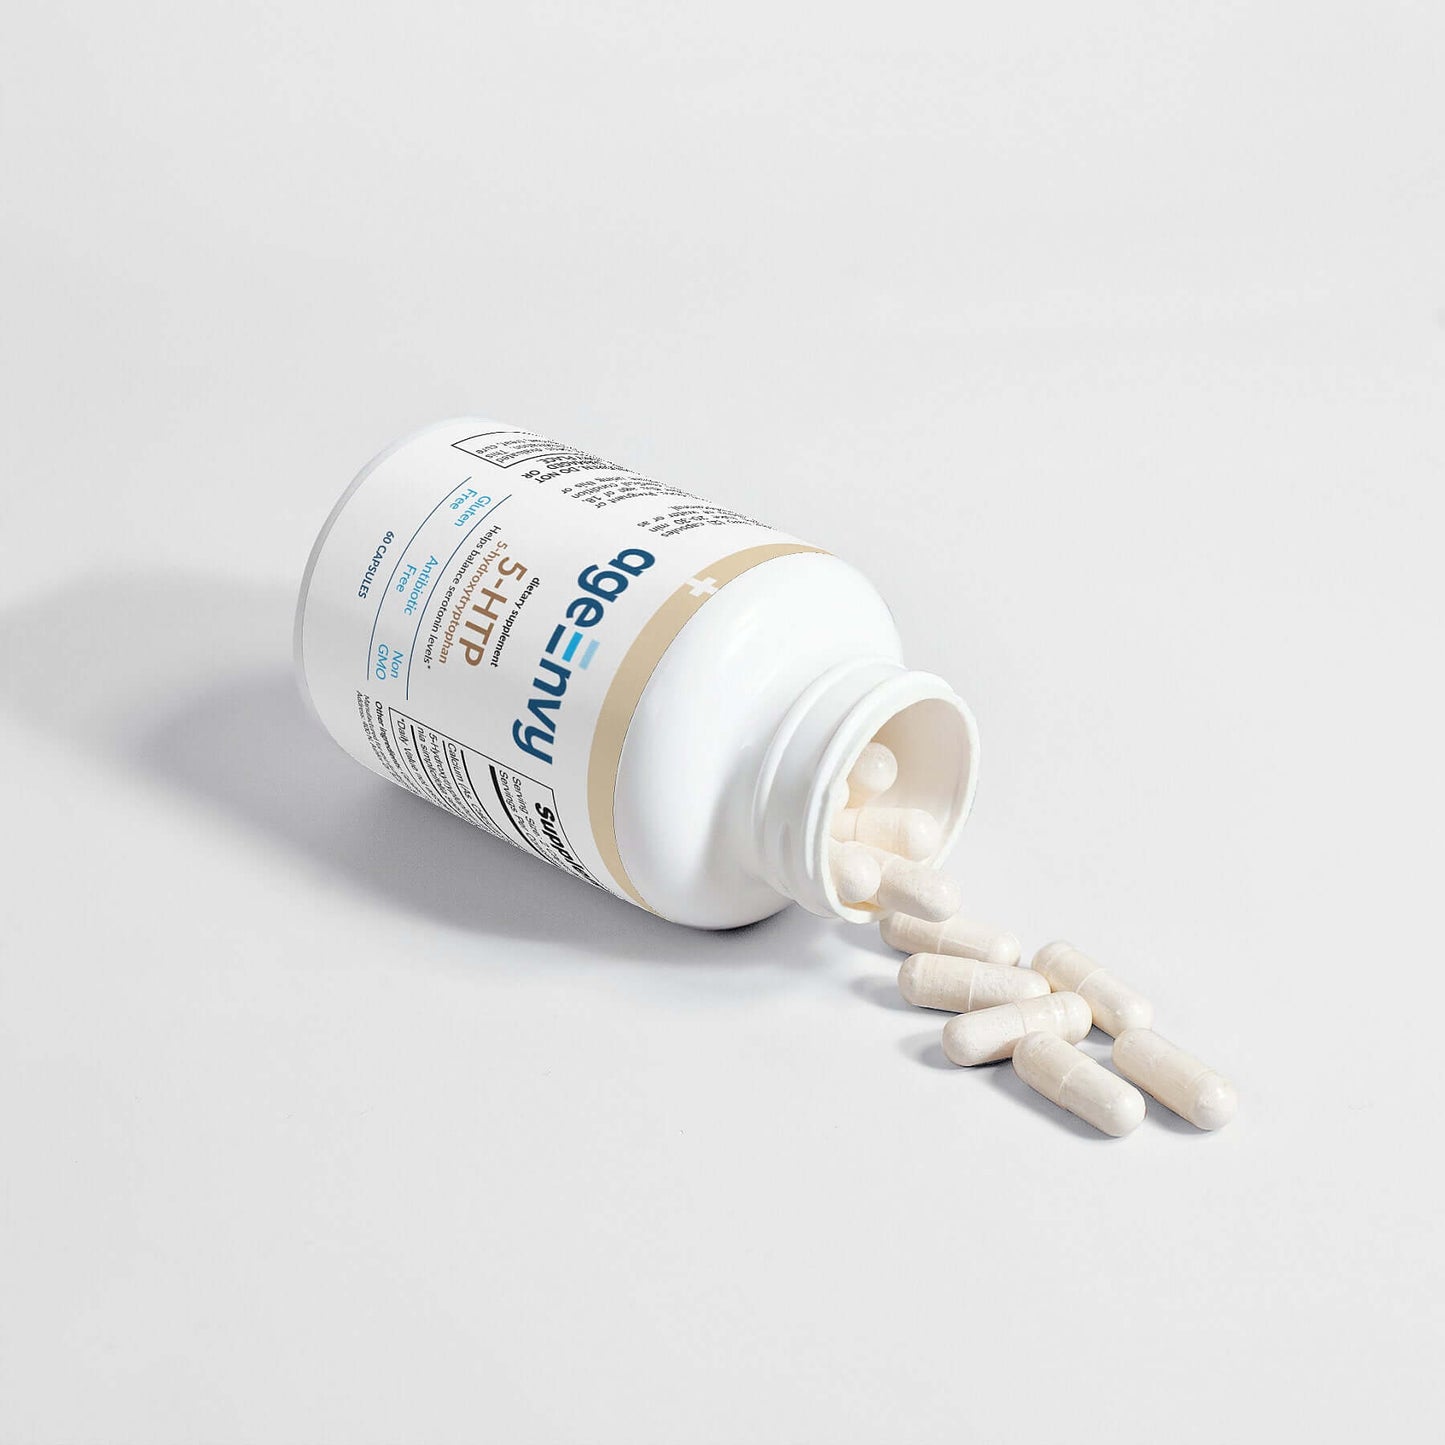 Advanced 5-HTP Supplement - The Perfect Companion for Health-Conscious Aging